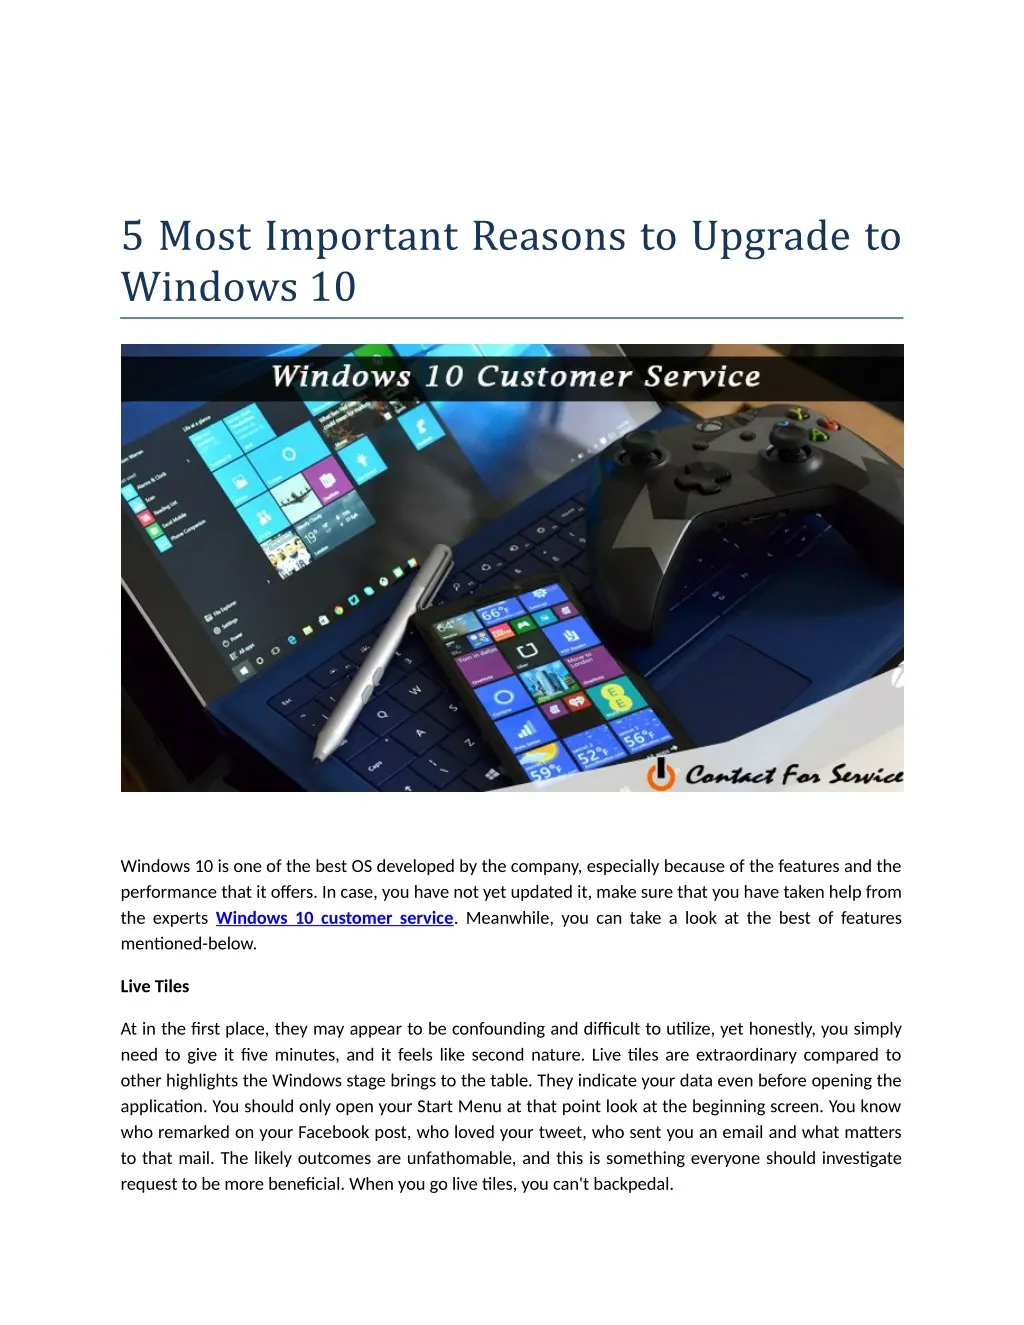 5 most important reasons to upgrade to windows 10